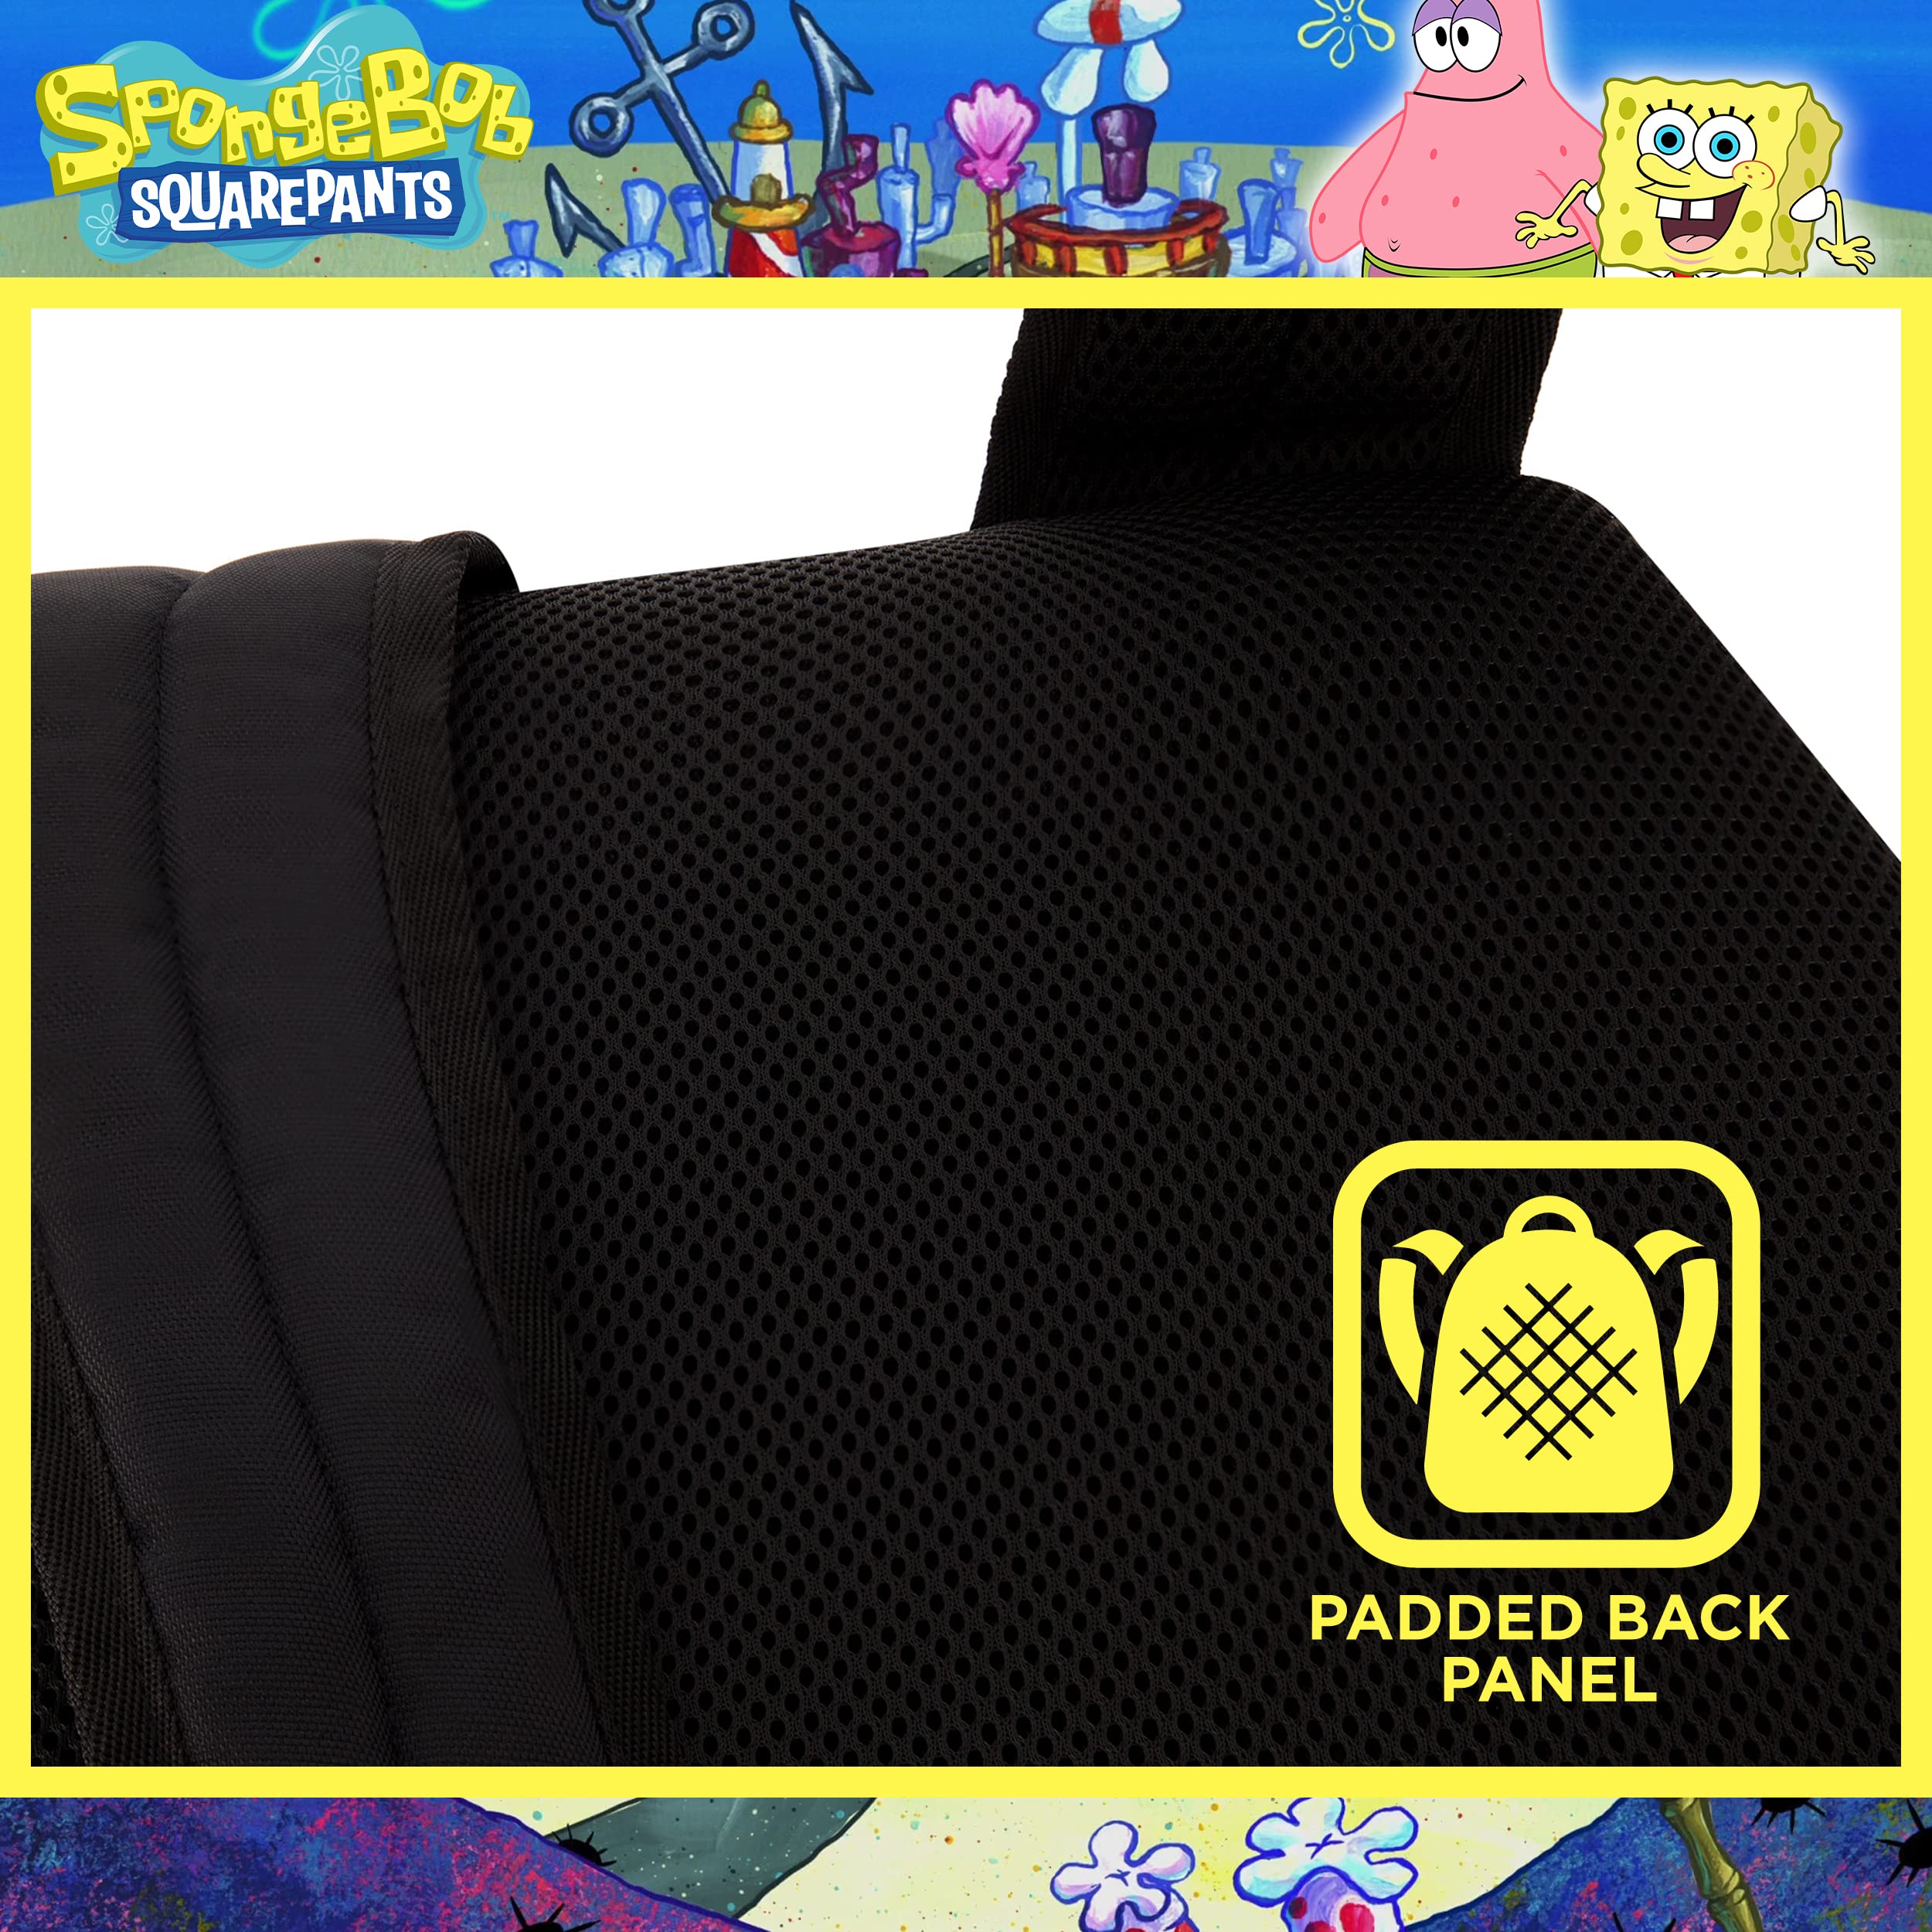 SpongeBob SquarePants 13 Inch Sleeve Laptop Backpack, Checkered Padded Computer Bag for Commute or Travel, Multi